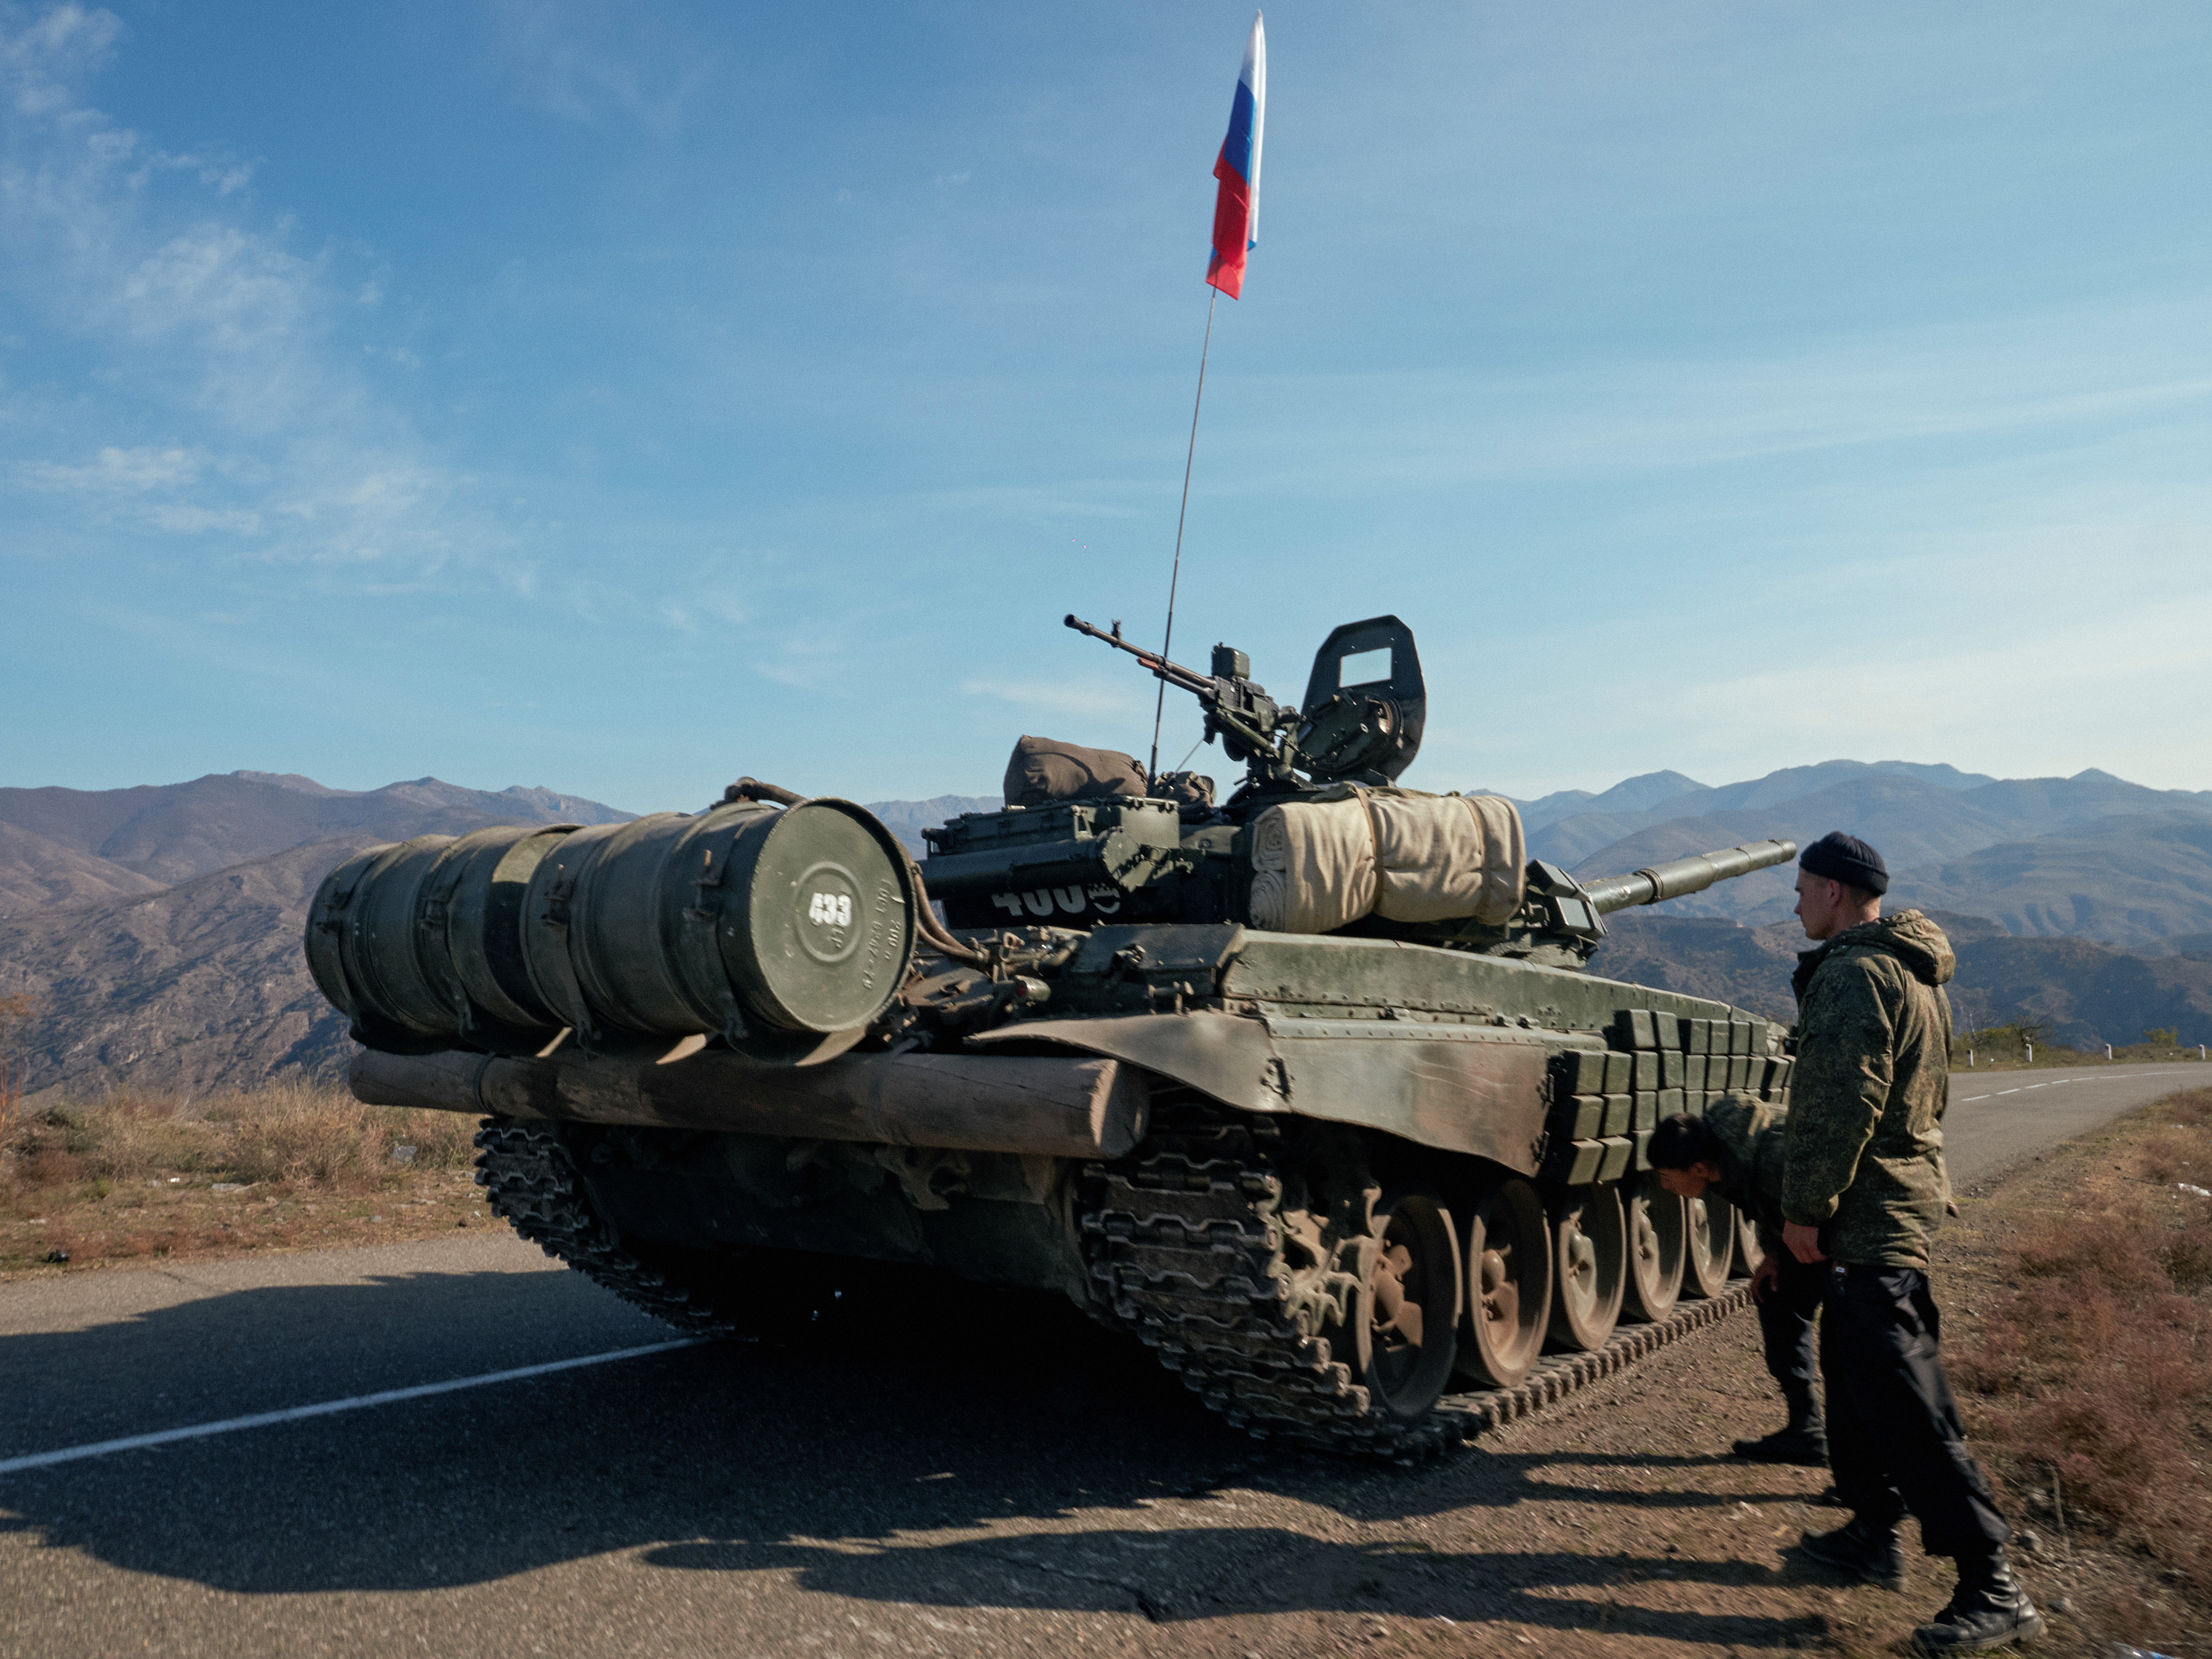 Service members of the Russian peacekeeping troops stand next to a tank in Nagorno-Karabakh